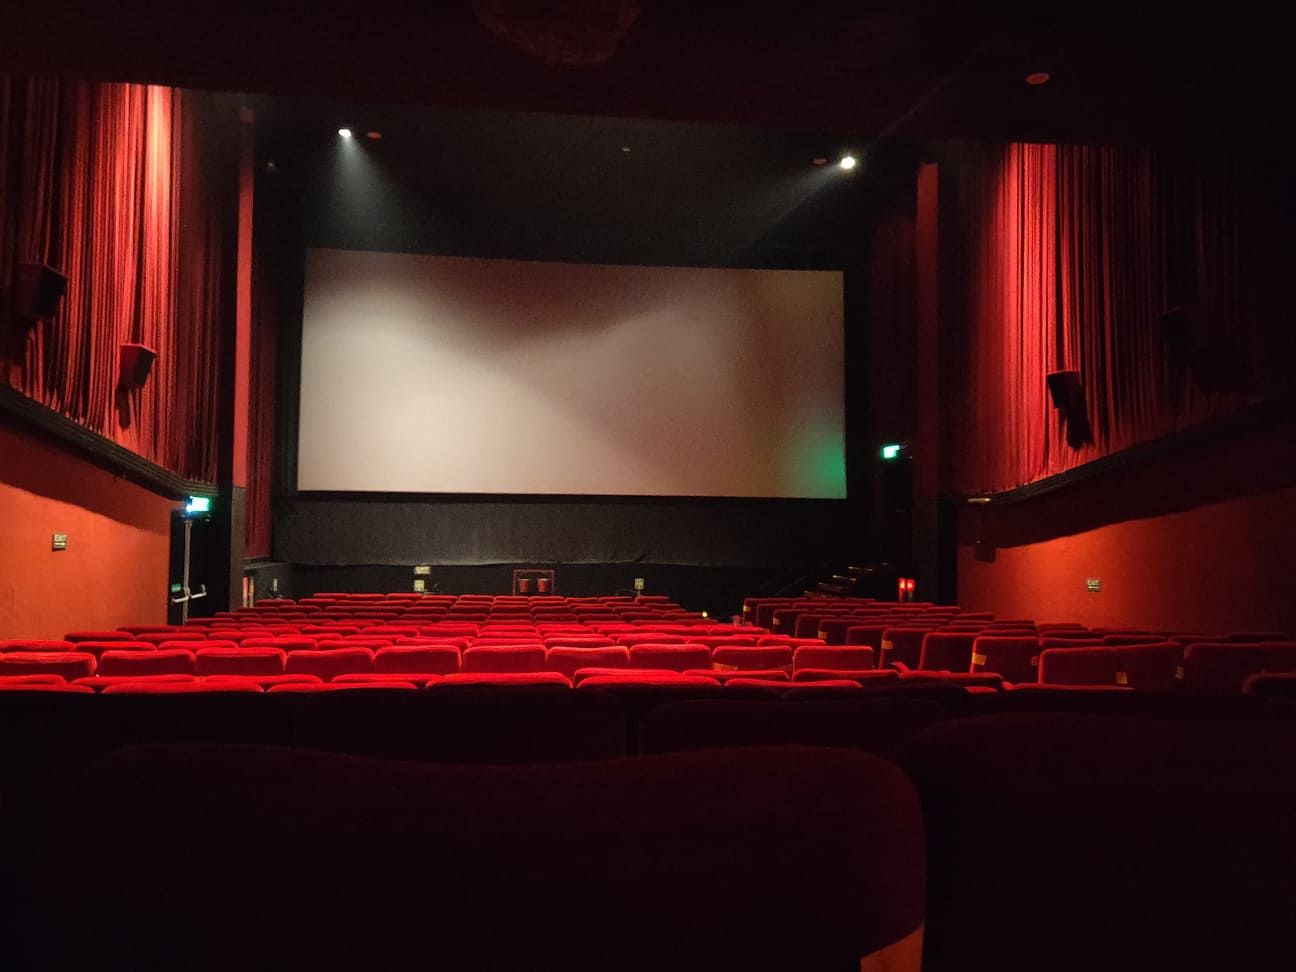 Ministry Of Home Affairs Allows For Increased Occupancy In Theatres From February 1, Exhibitors And Cinema Owners Grateful